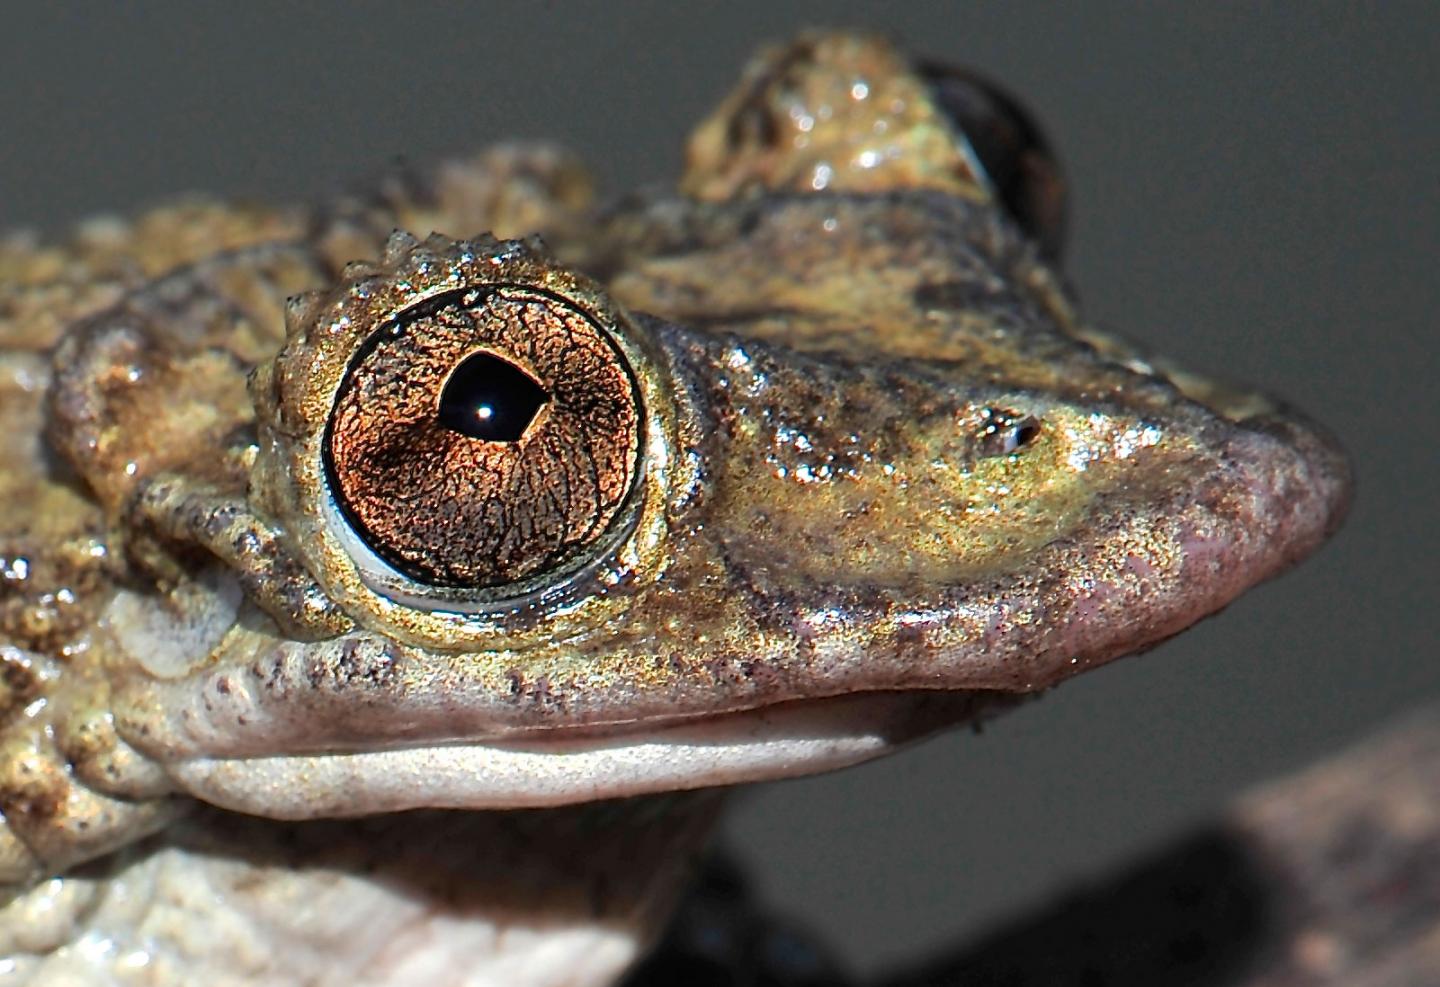 Venomous Frogs Use Deadly Face Spines To Slay Their Enemies